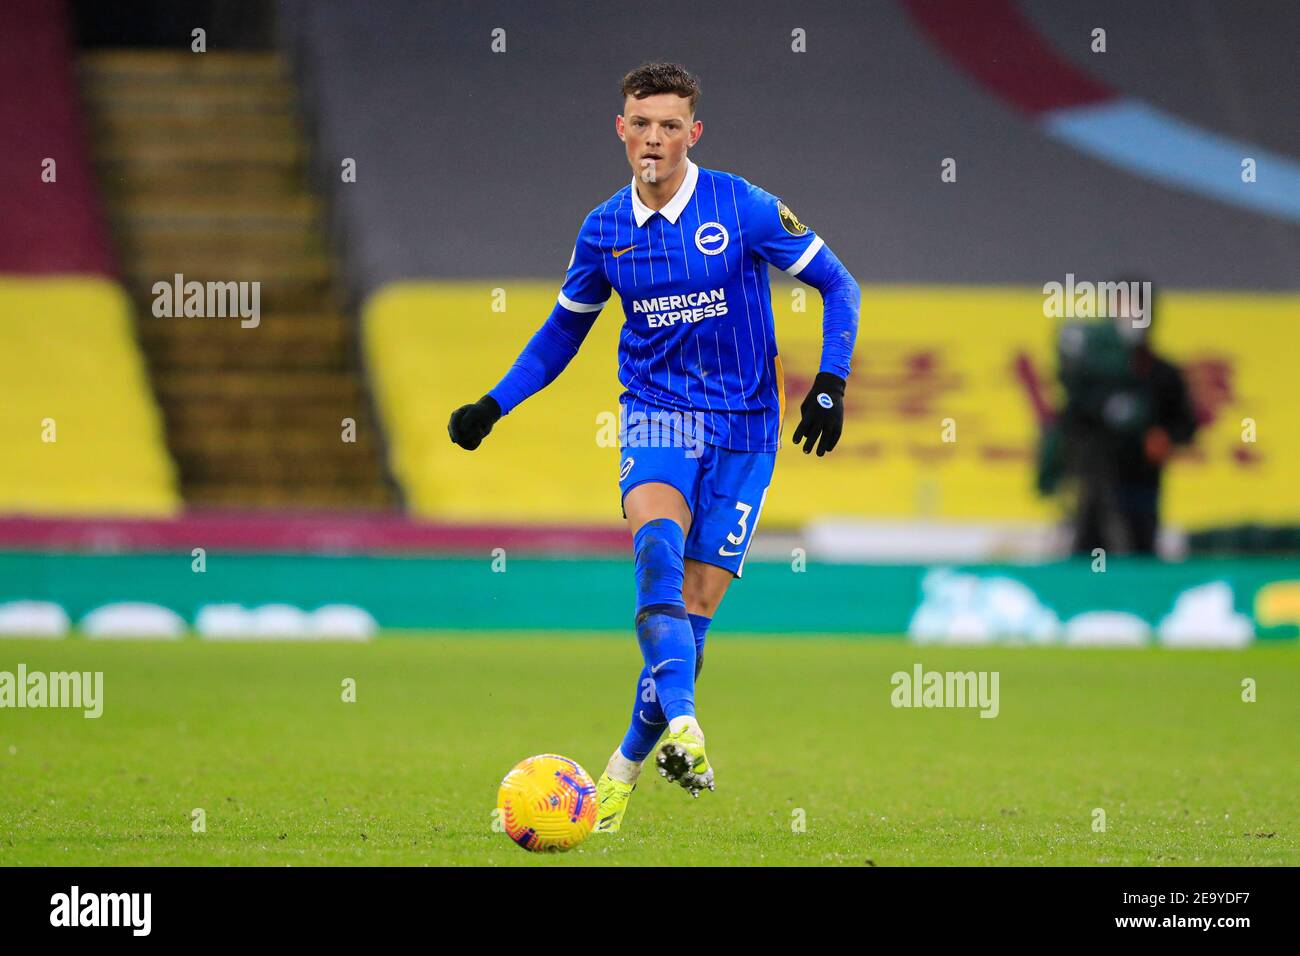 Burnley Uk 06th Feb 2021 Ben White 3 Of Brighton Hove Albion Passes The Ball In Burnley Uk On 2 6 2021 Photo By Conor Molloy News Images Sipa Usa Credit Sipa Usa Alamy Live News